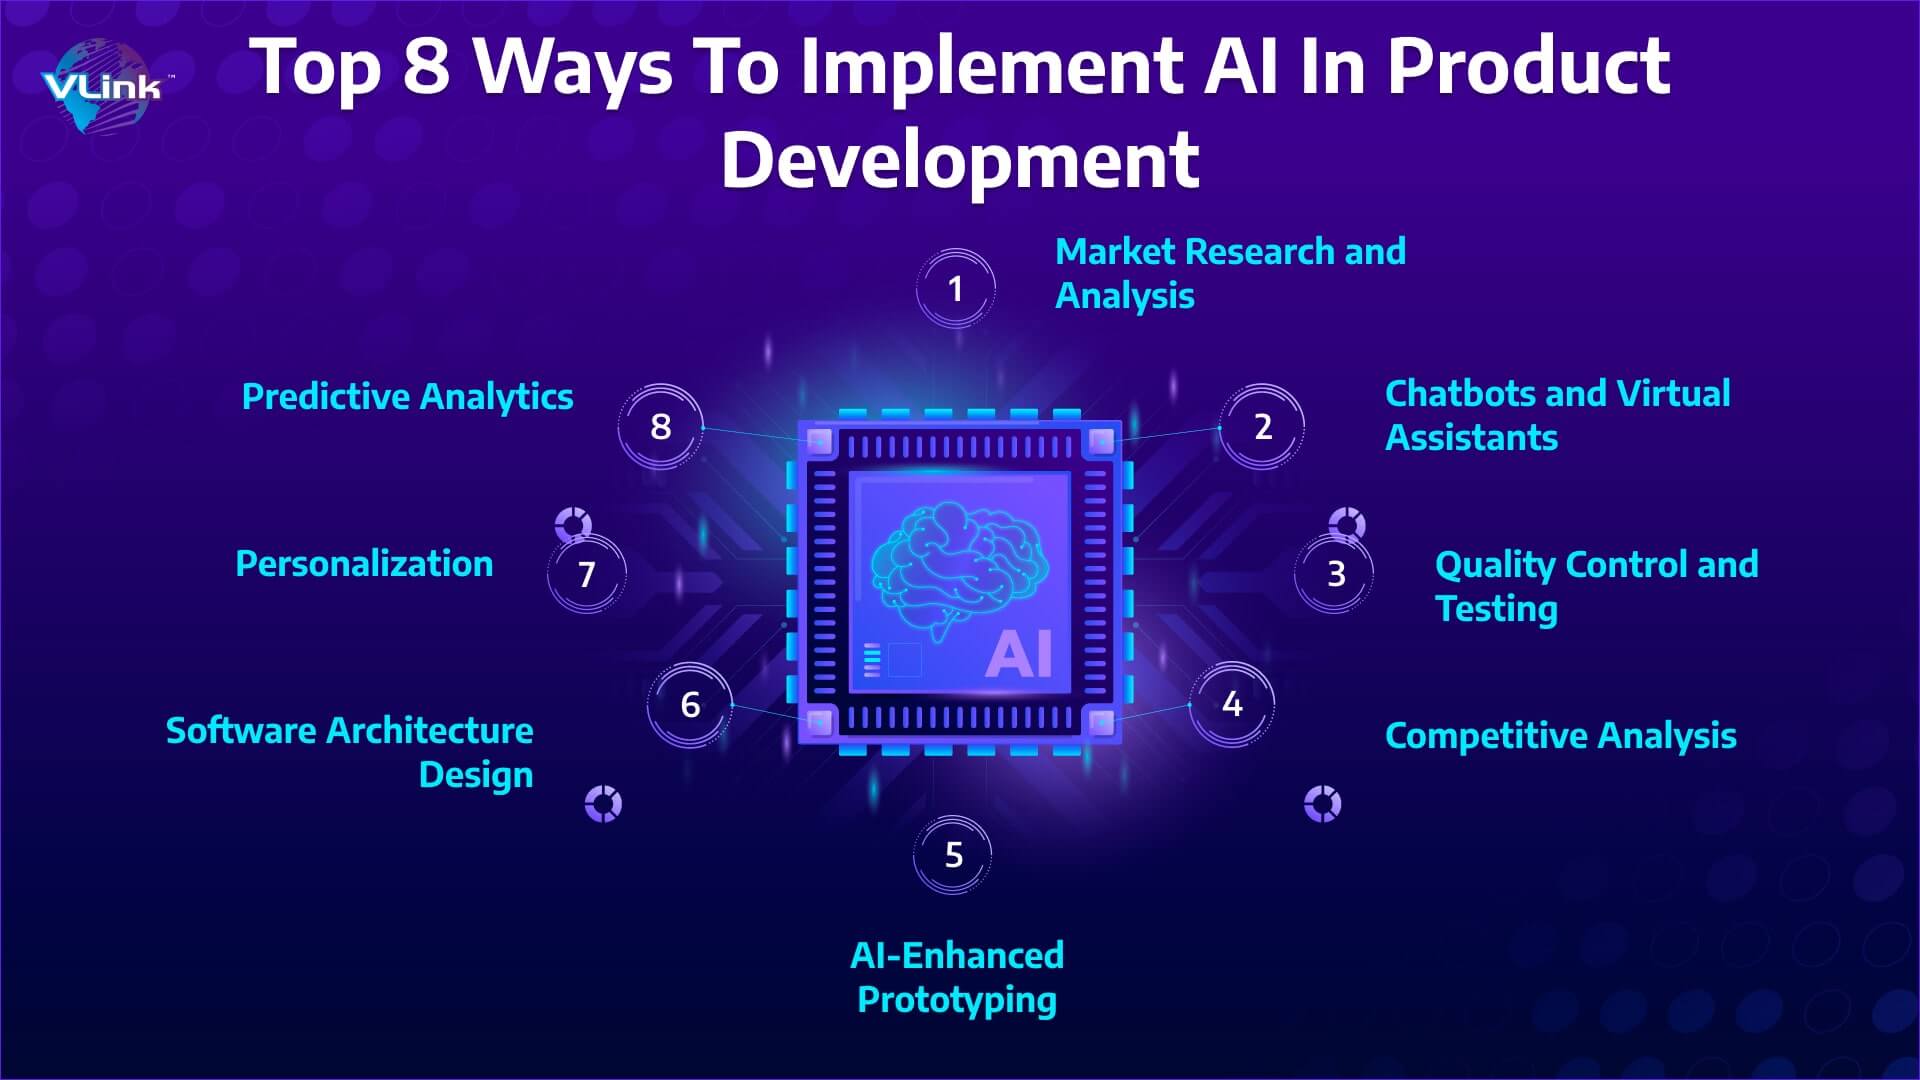 Top 8 ways to implement AI in product development